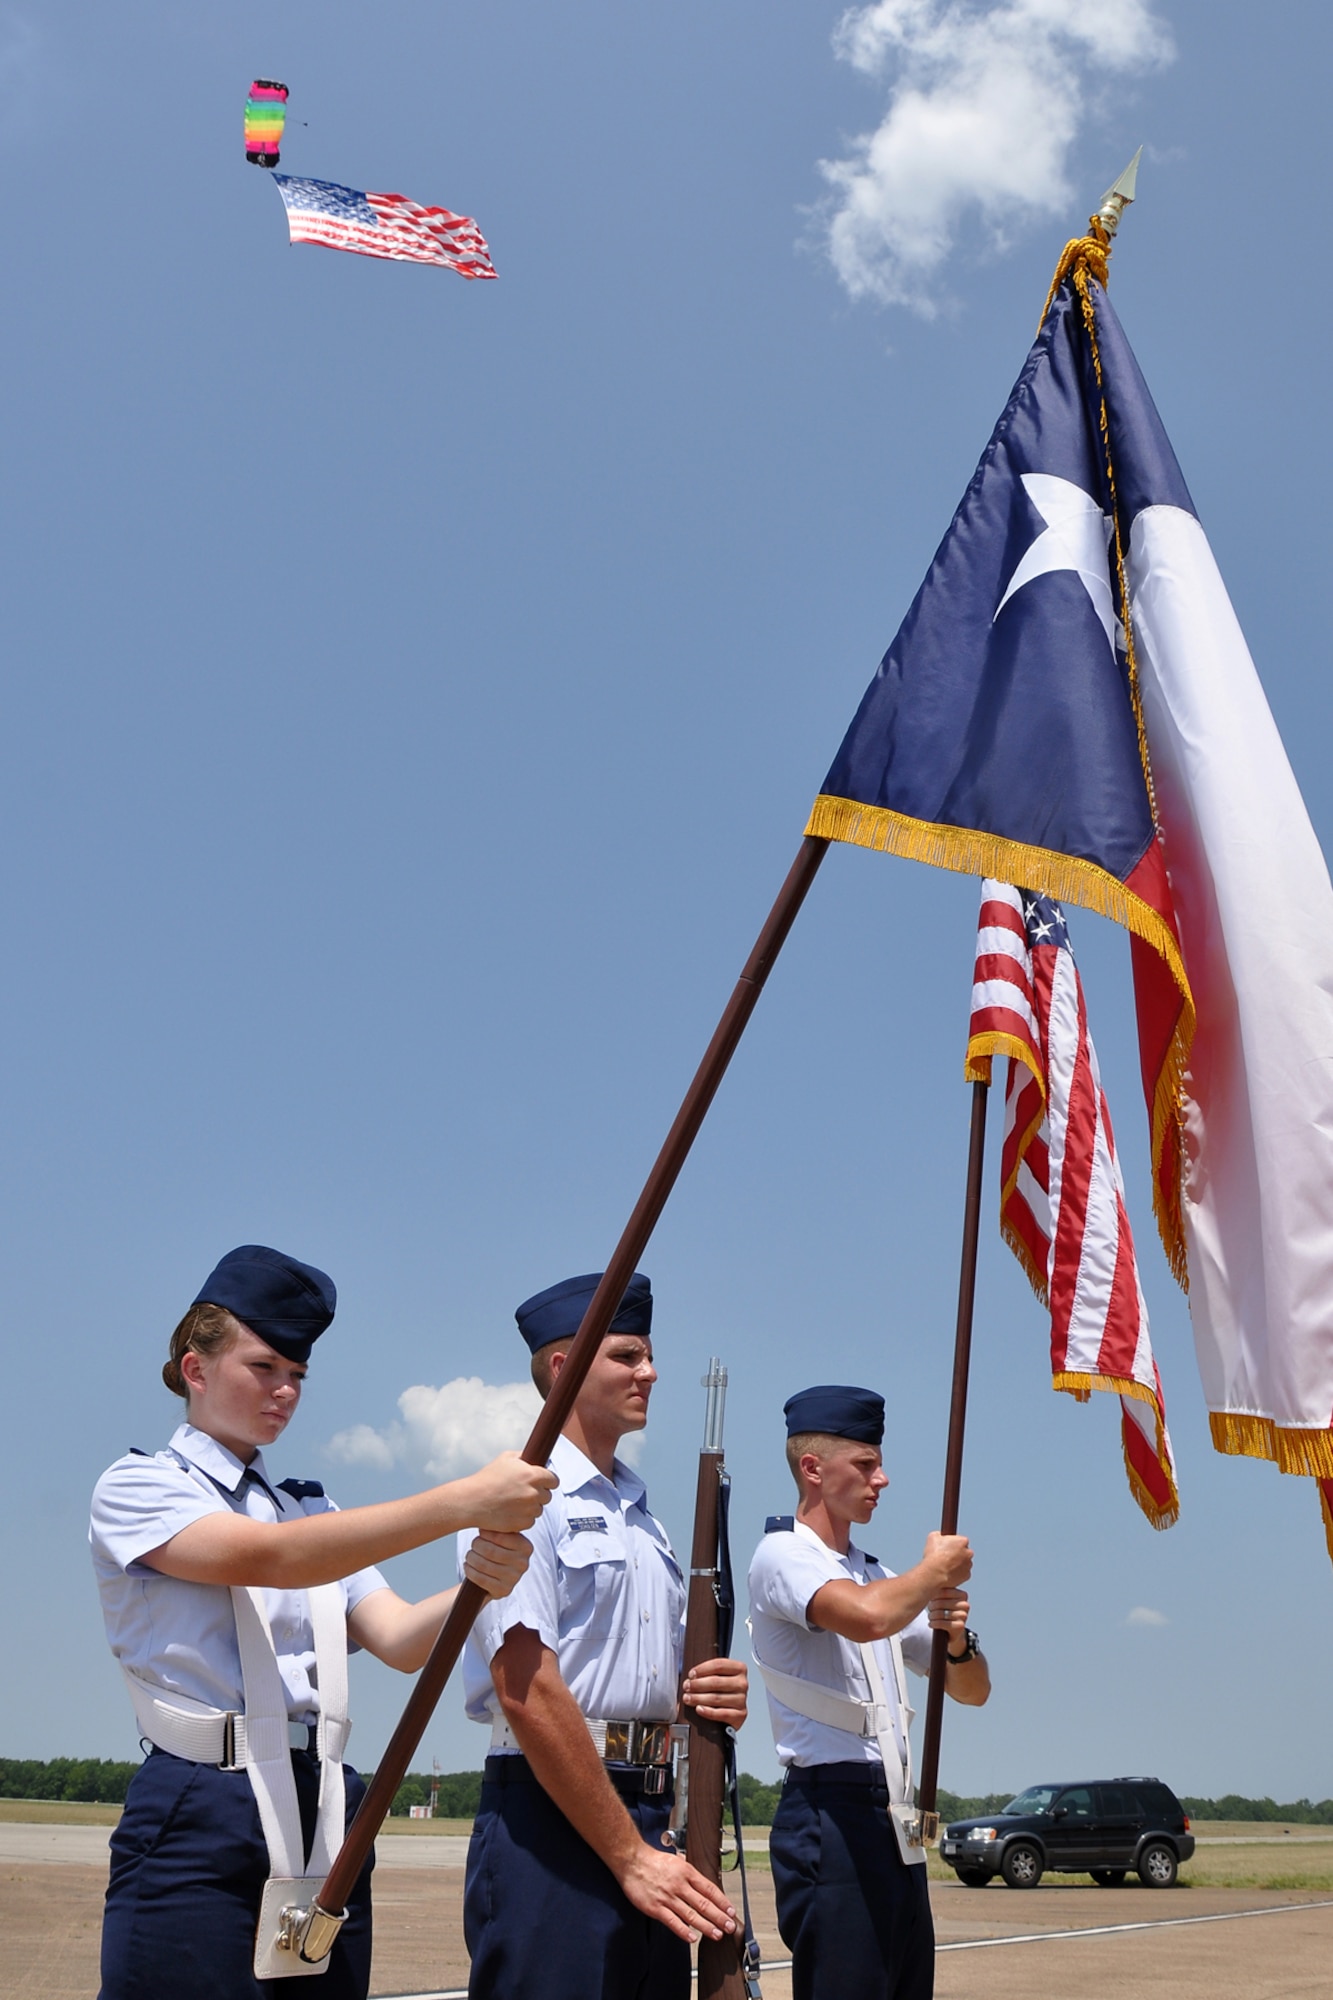 Members of the Civil Air Patrol, Tyler Composite Squadron, Tyler Texas, present the colors at the “Wings Over Tyler Air Show” as a parachutist makes his approach to the drop zone with an American Flag during opening ceremonies at Tyler Pounds Regional Airport, July 3, 2011. (L to R) Cadet 2nd Lt. Sarah Fitzgerald, Cadet Capt. James Schulgen and Cadet 2nd Lt. Joseph Hughes. (U.S. Air Force photo/Tech. Sgt. Jeff Walston)